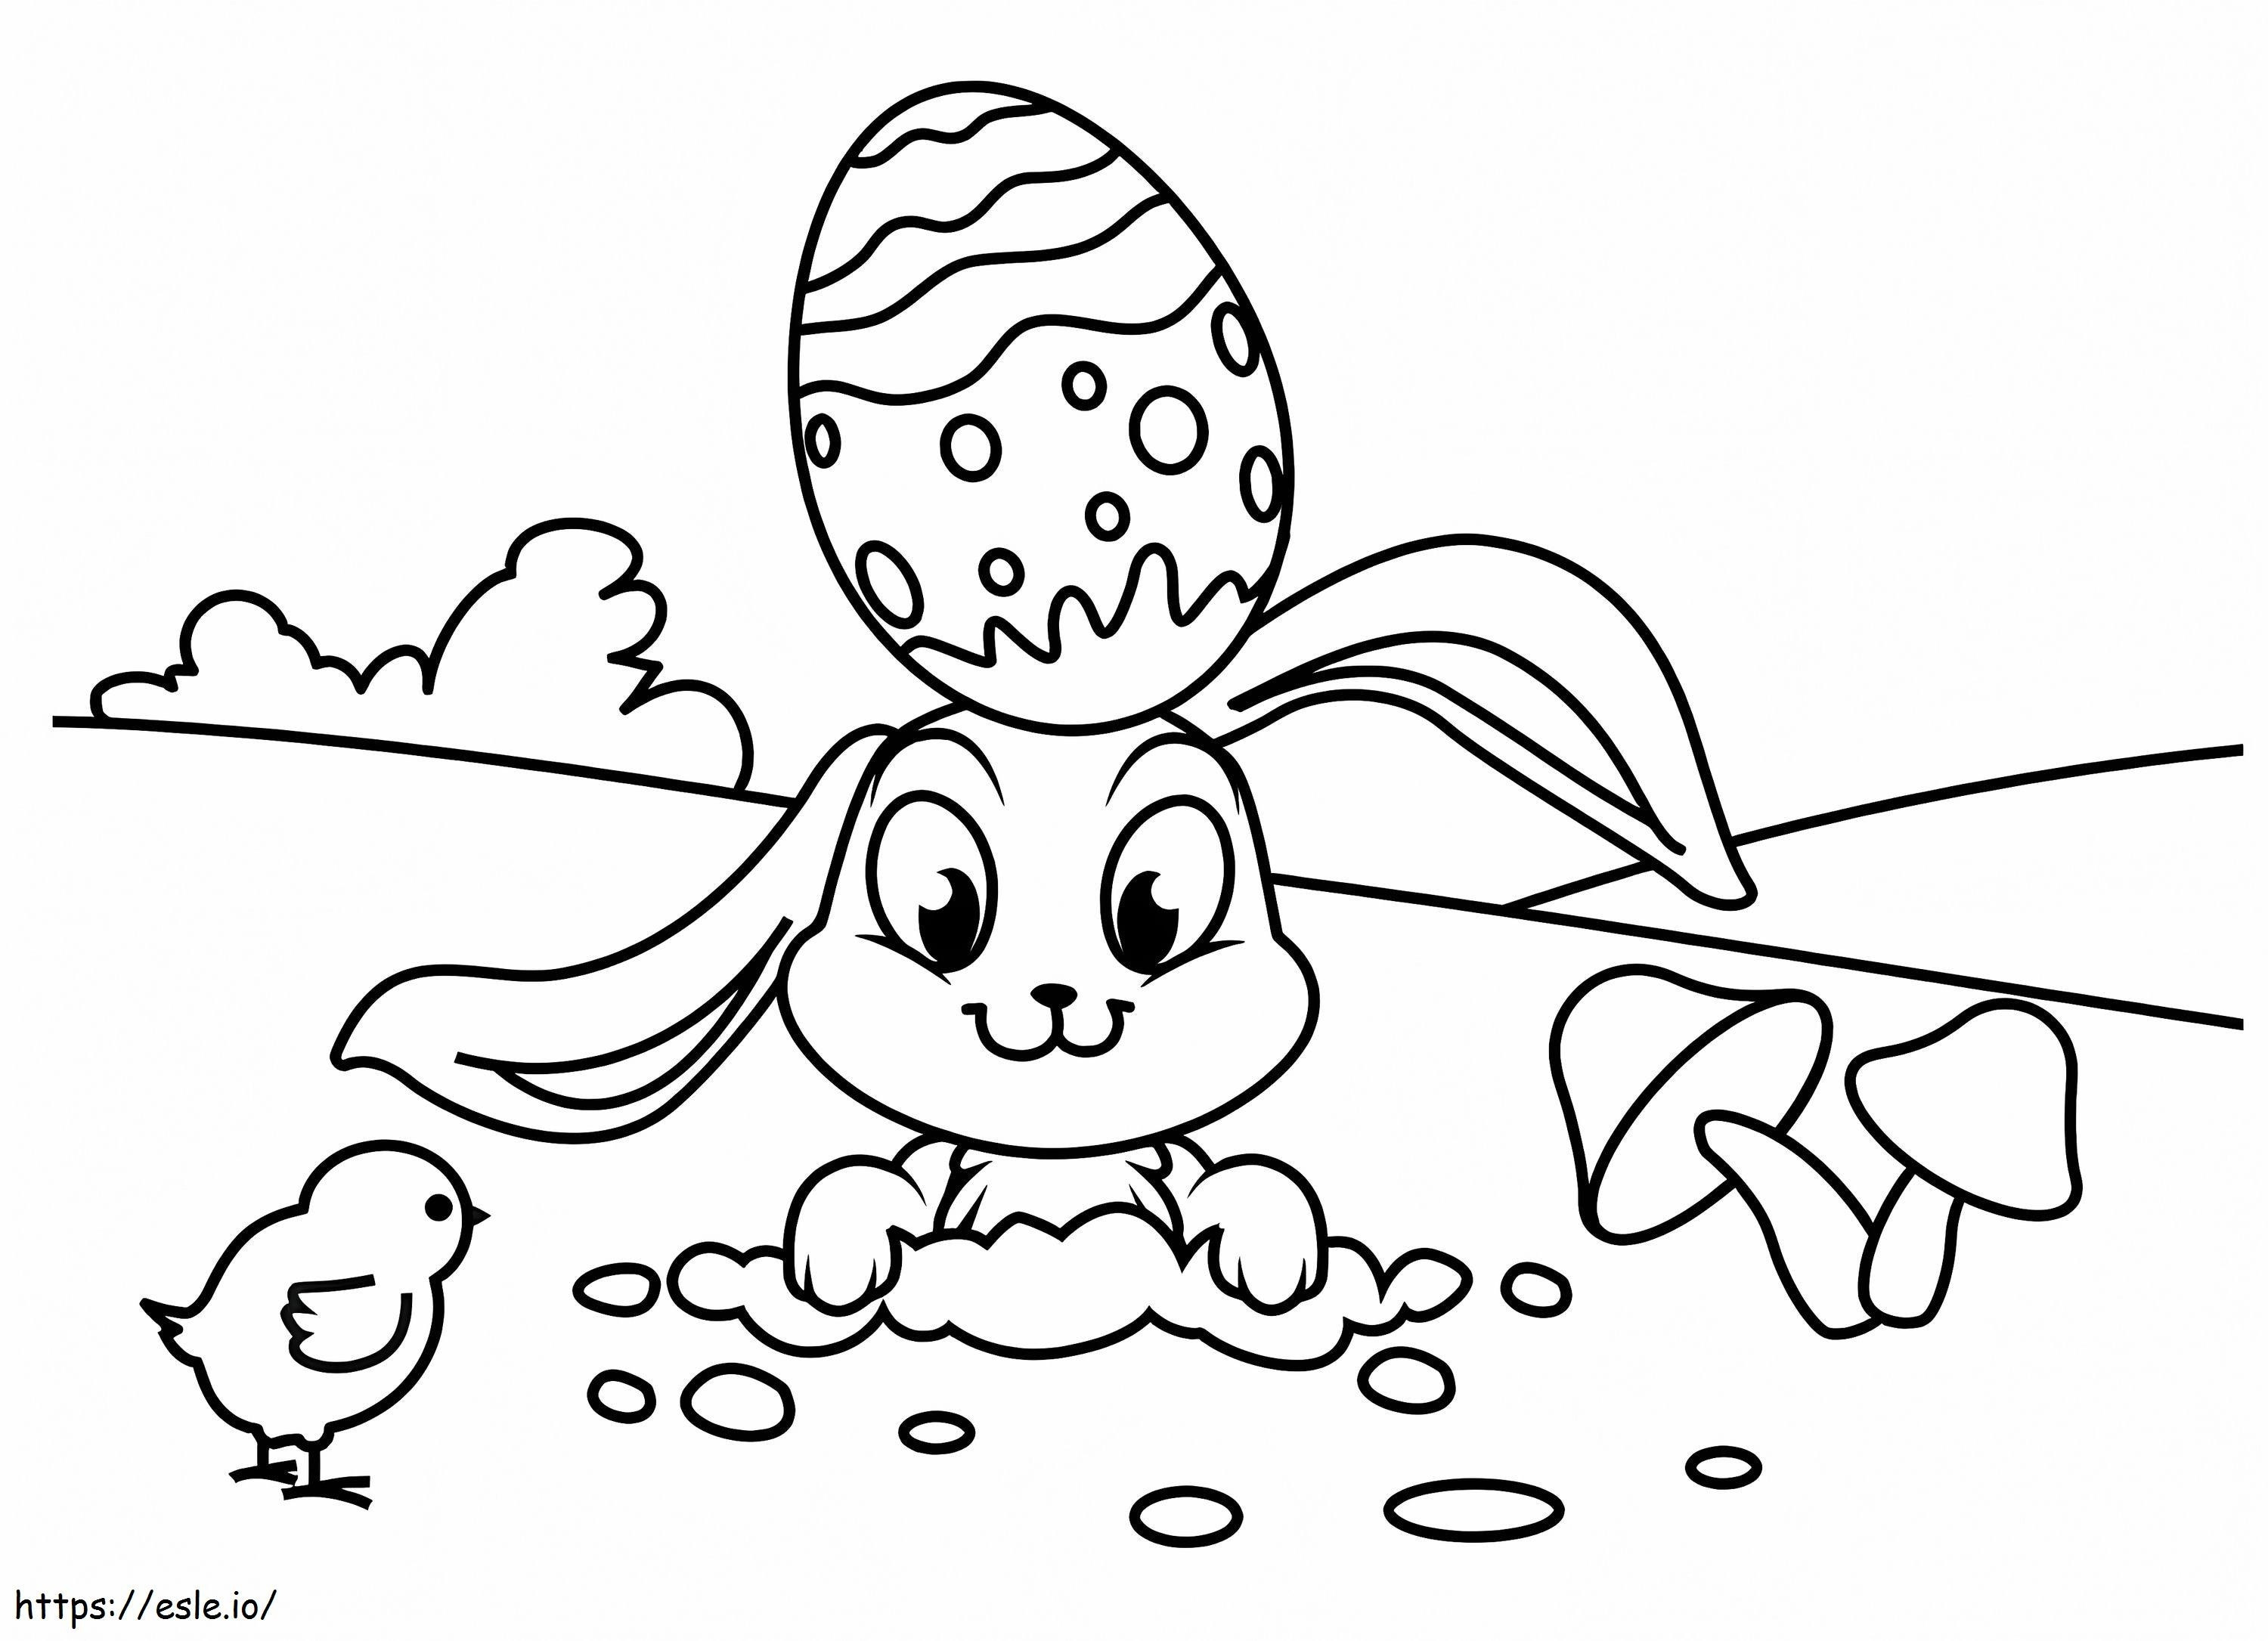 Easter Rabbit And Chick coloring page